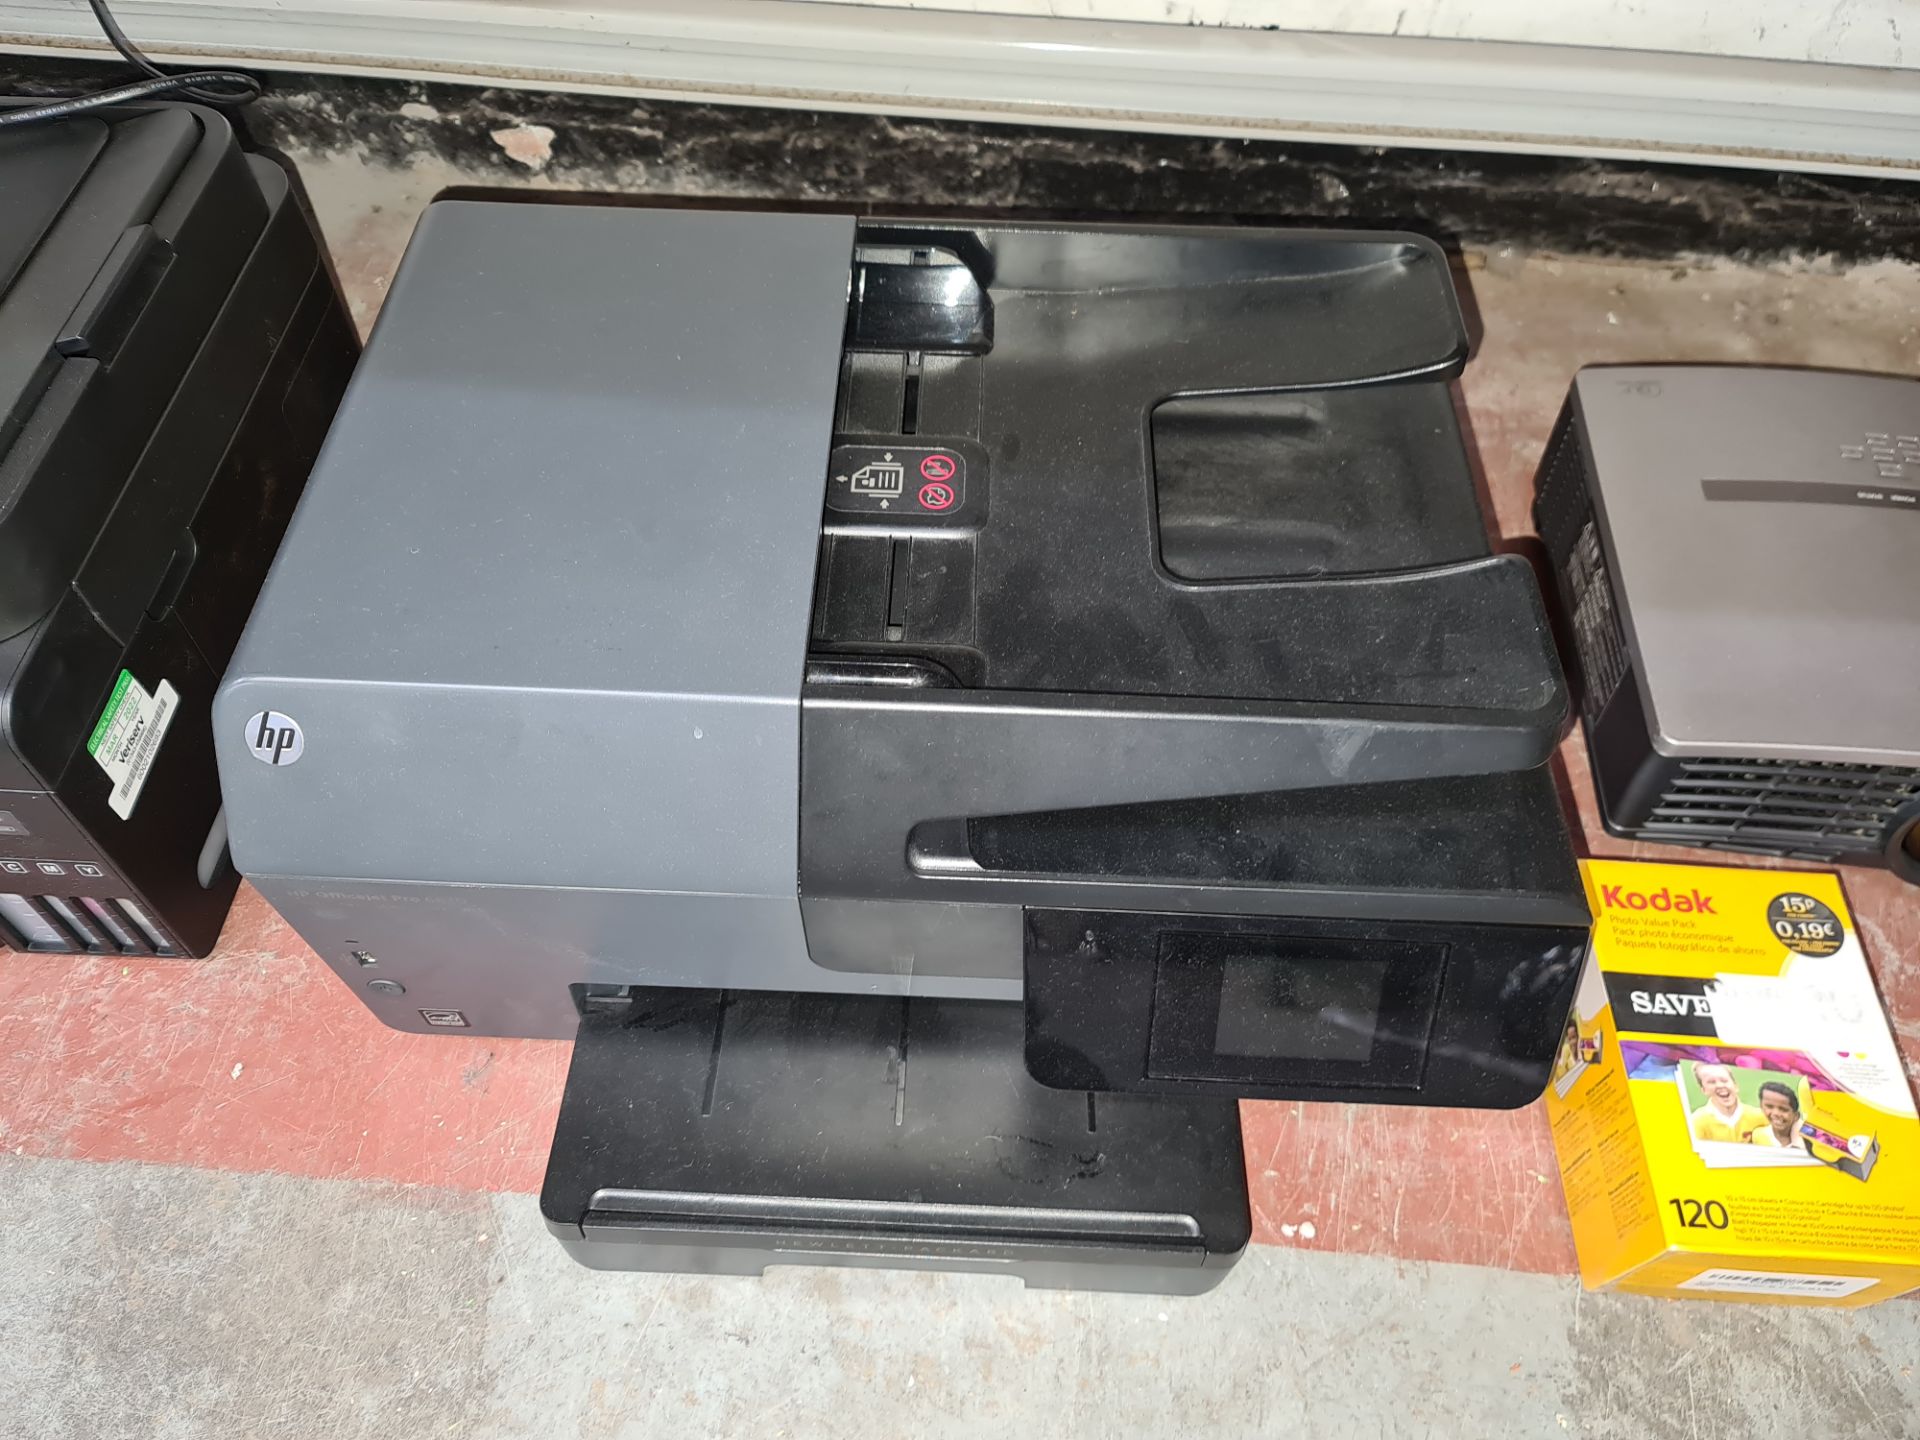 Contents of a bay of printers, plus projector and Kodak ink cartridges - Image 7 of 12